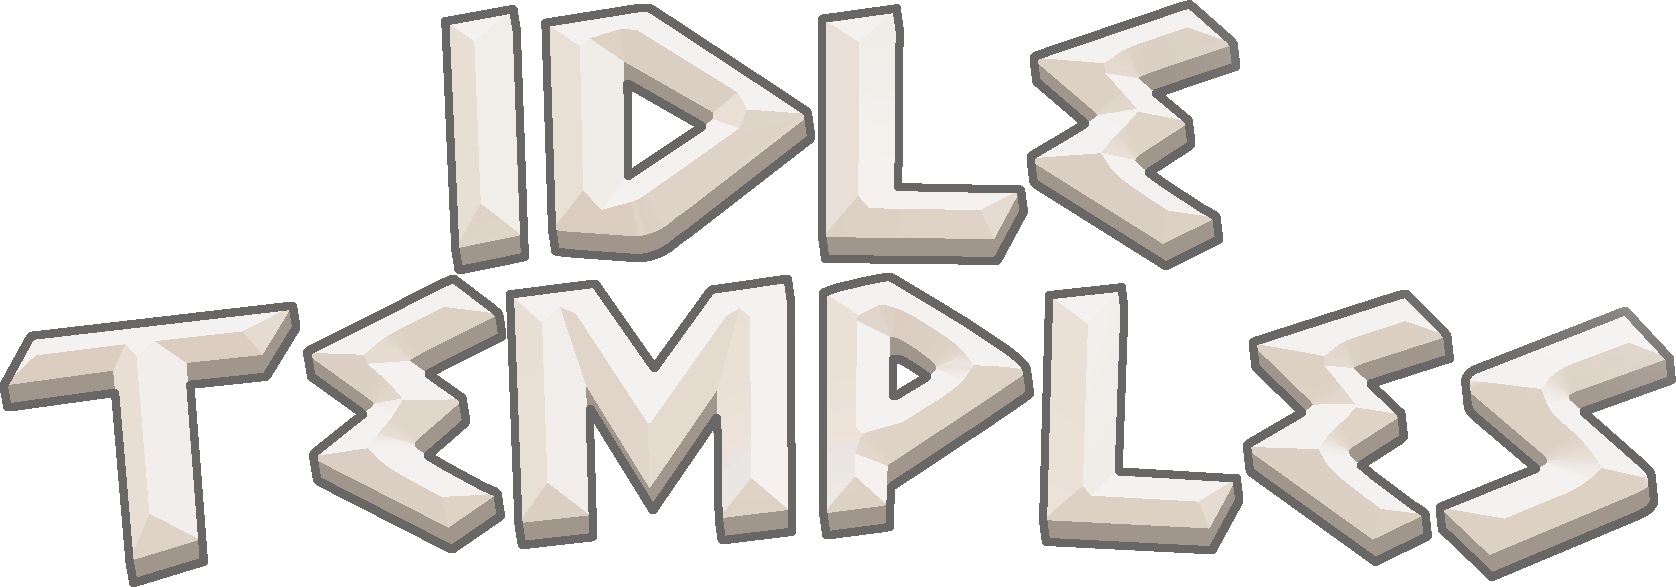 Idle Temples